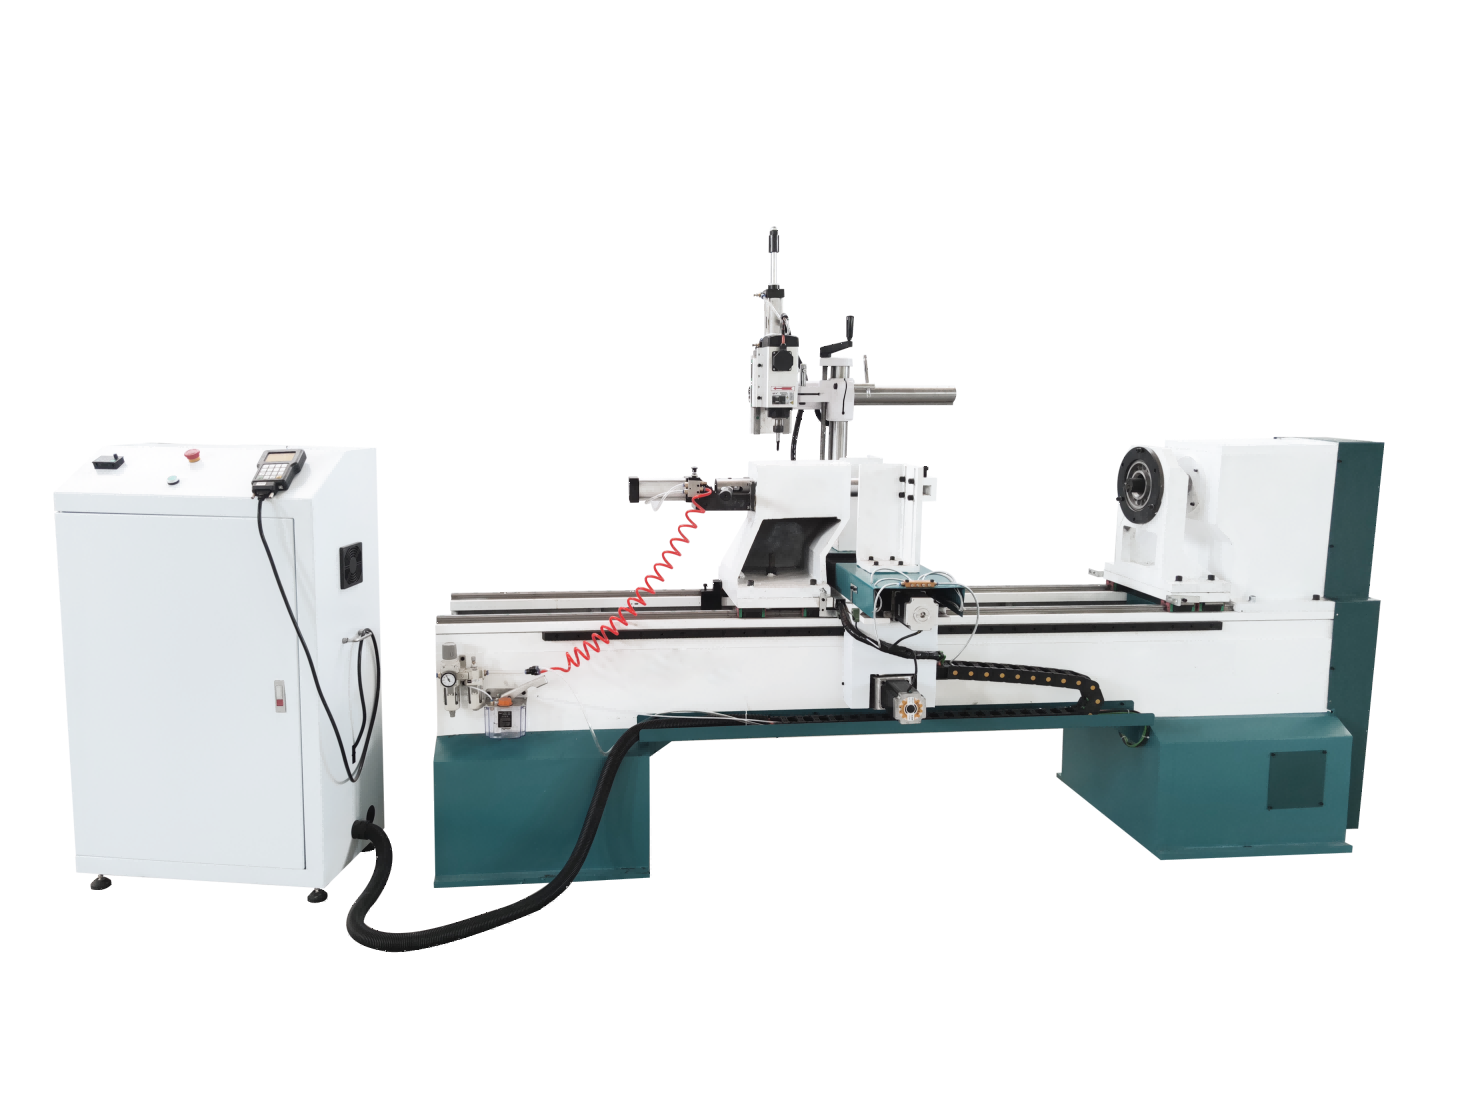 What Is A Wood Lathe Machine Used For?